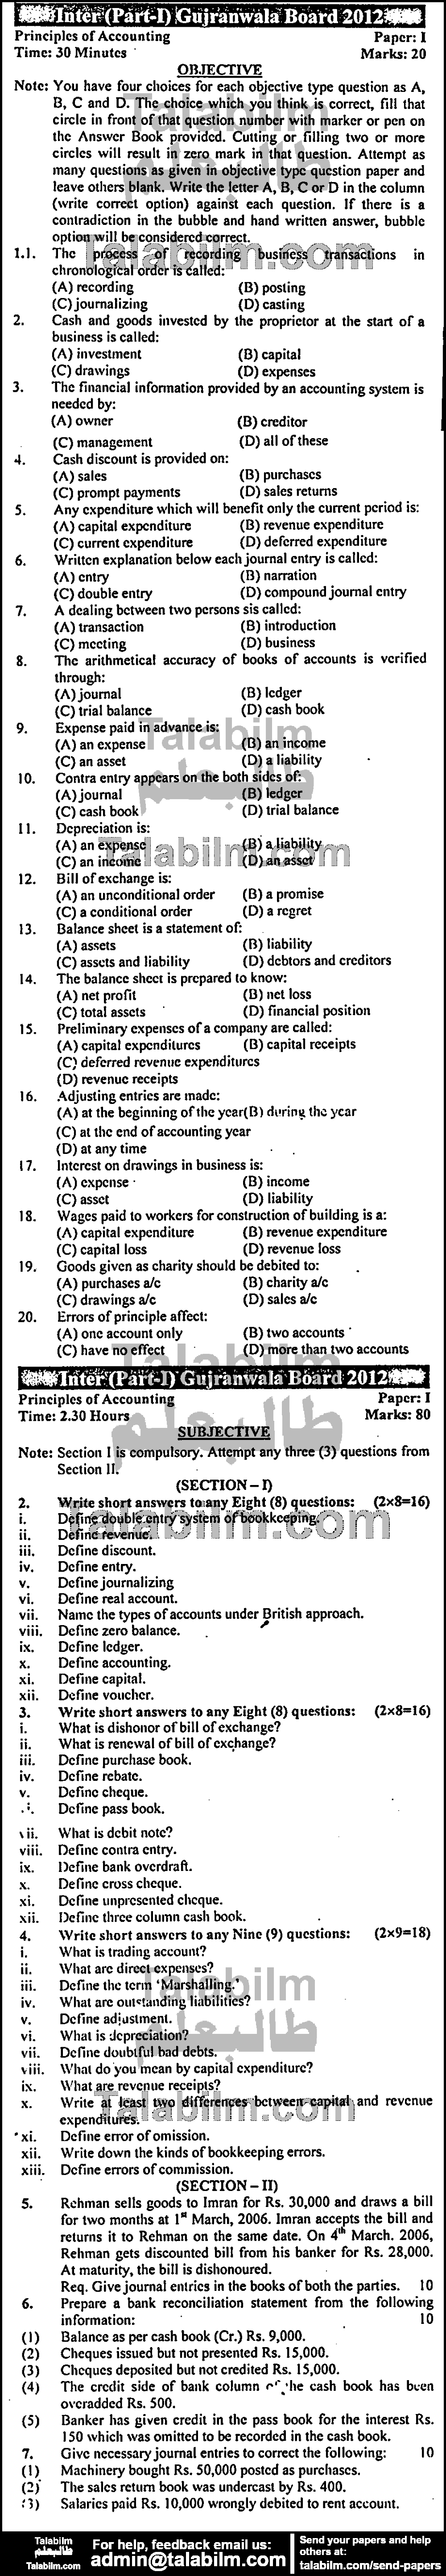 Principles Of Accounting 0 past paper for Group-I 2012